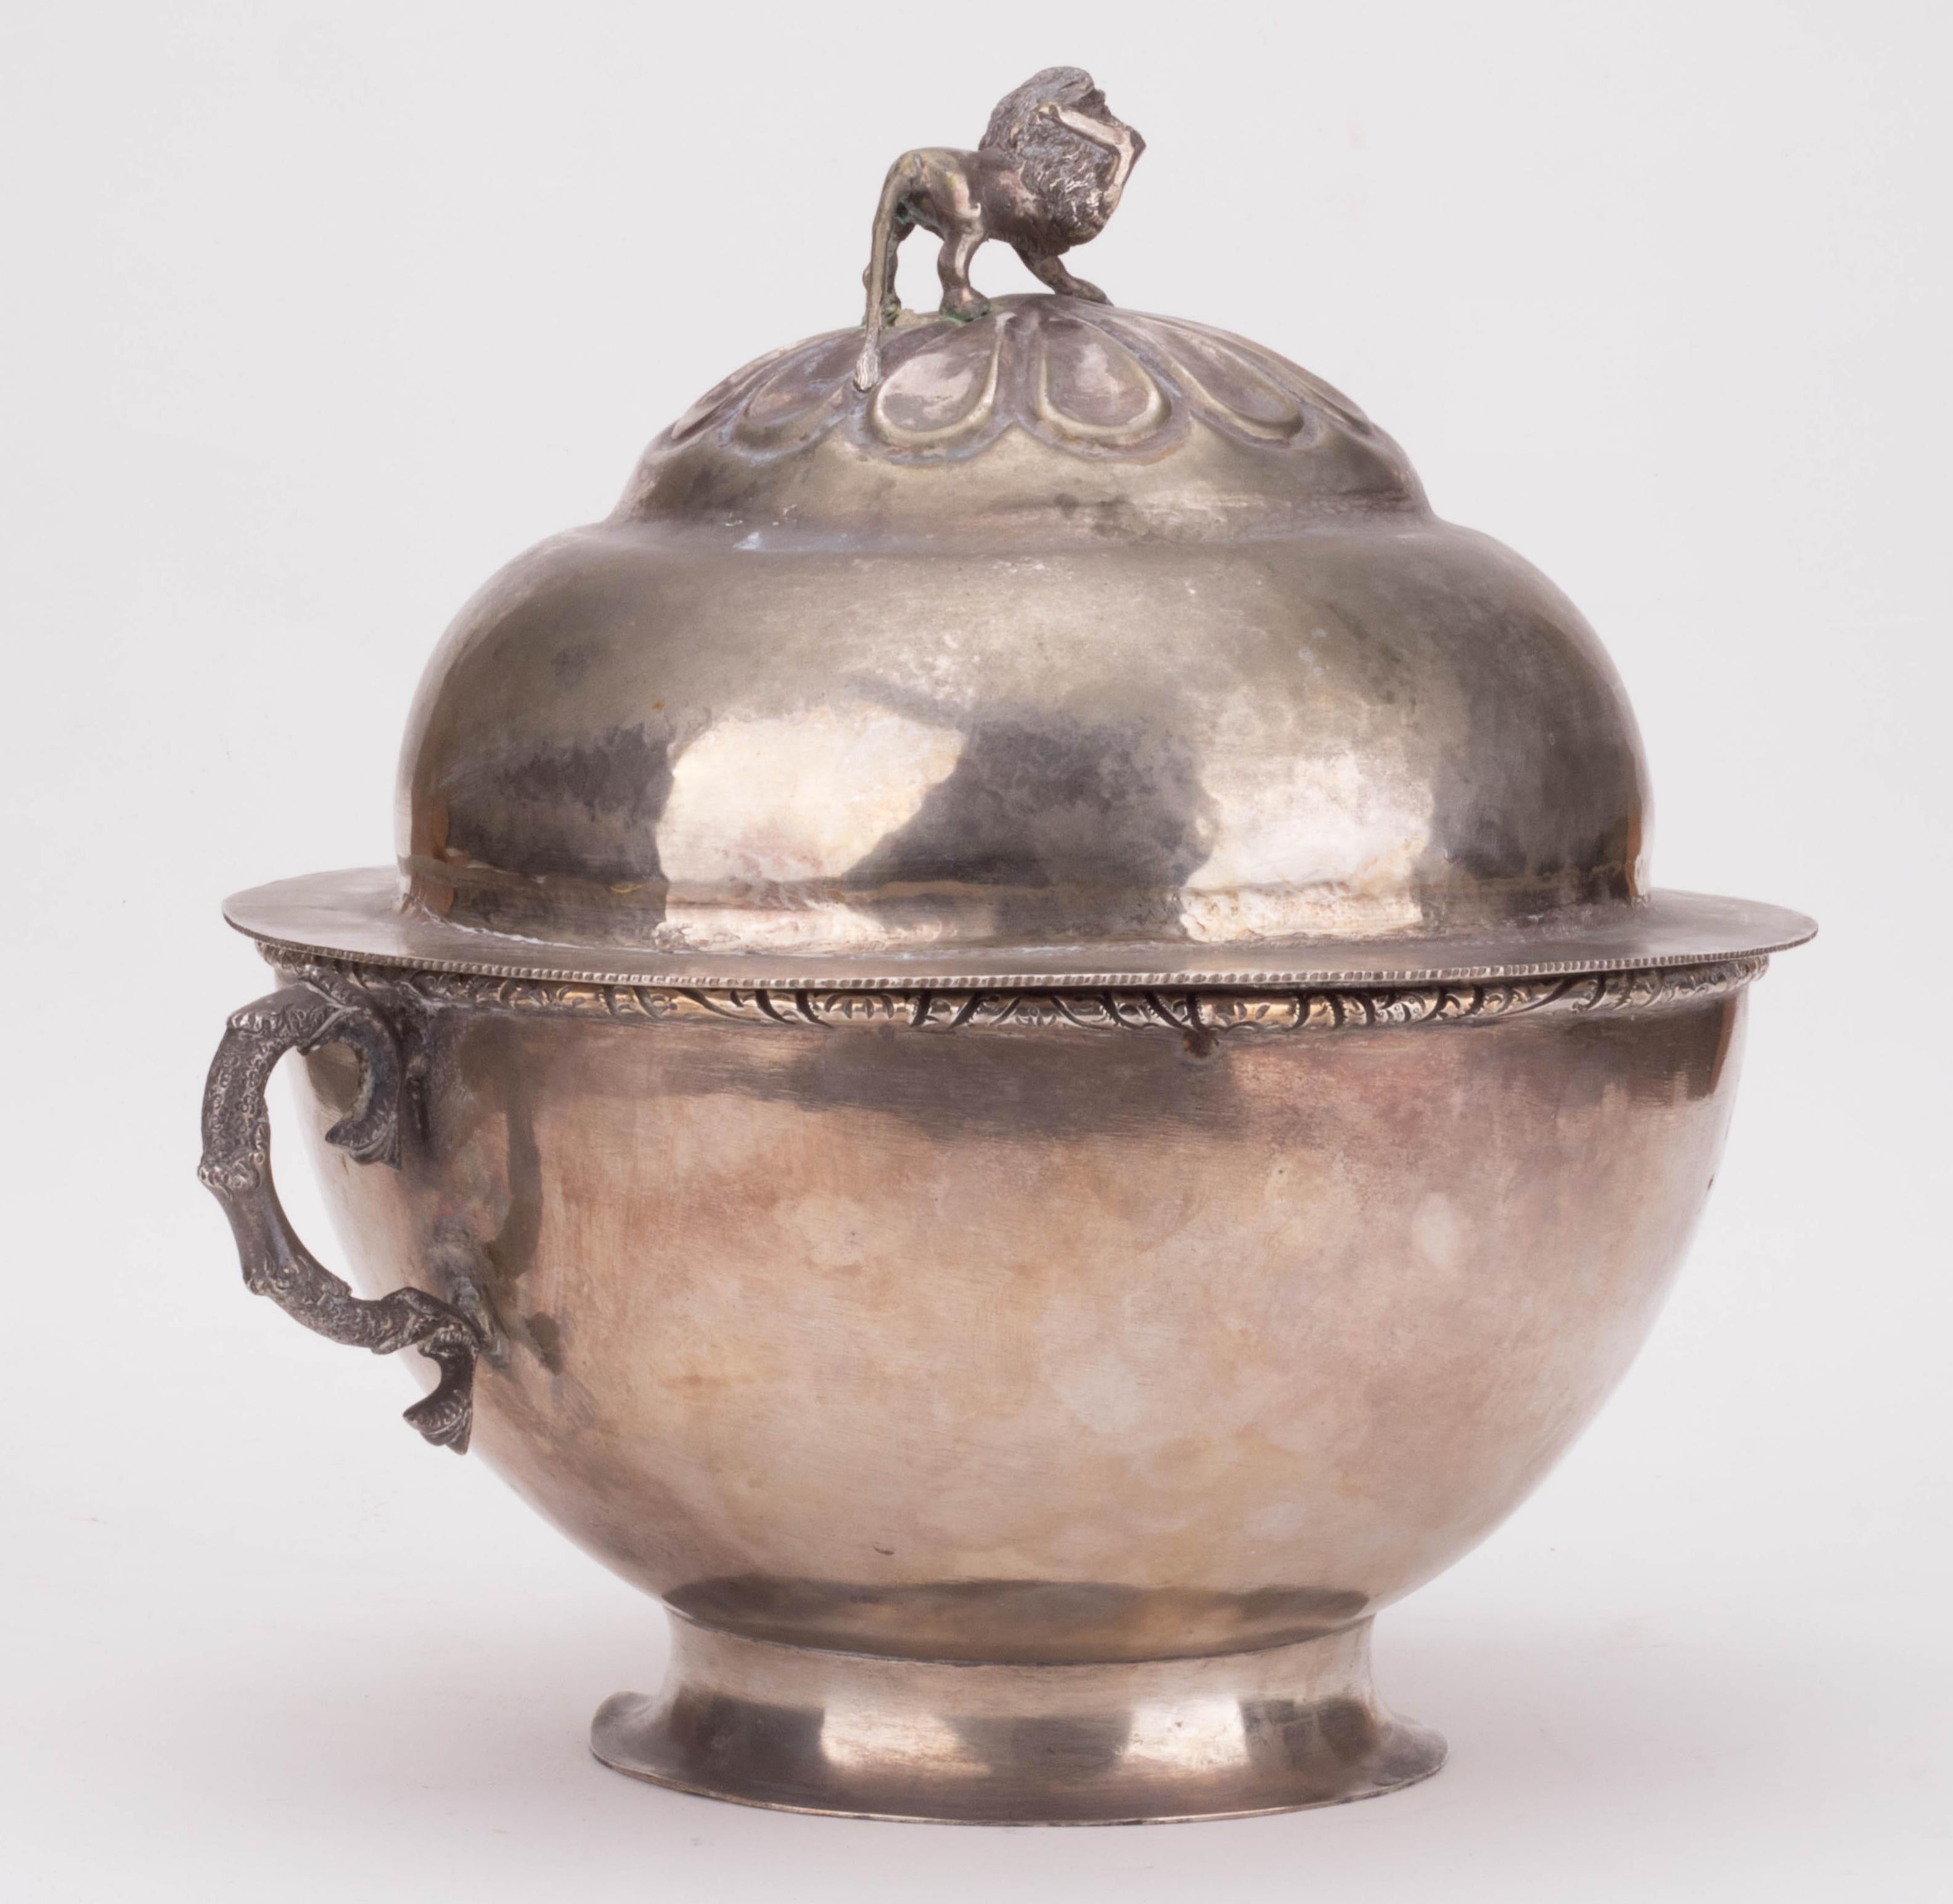 18th Century and Earlier 1780s Colonial Peruvian Globe Shaped Tureen with Lion Shaped Knob on Lid